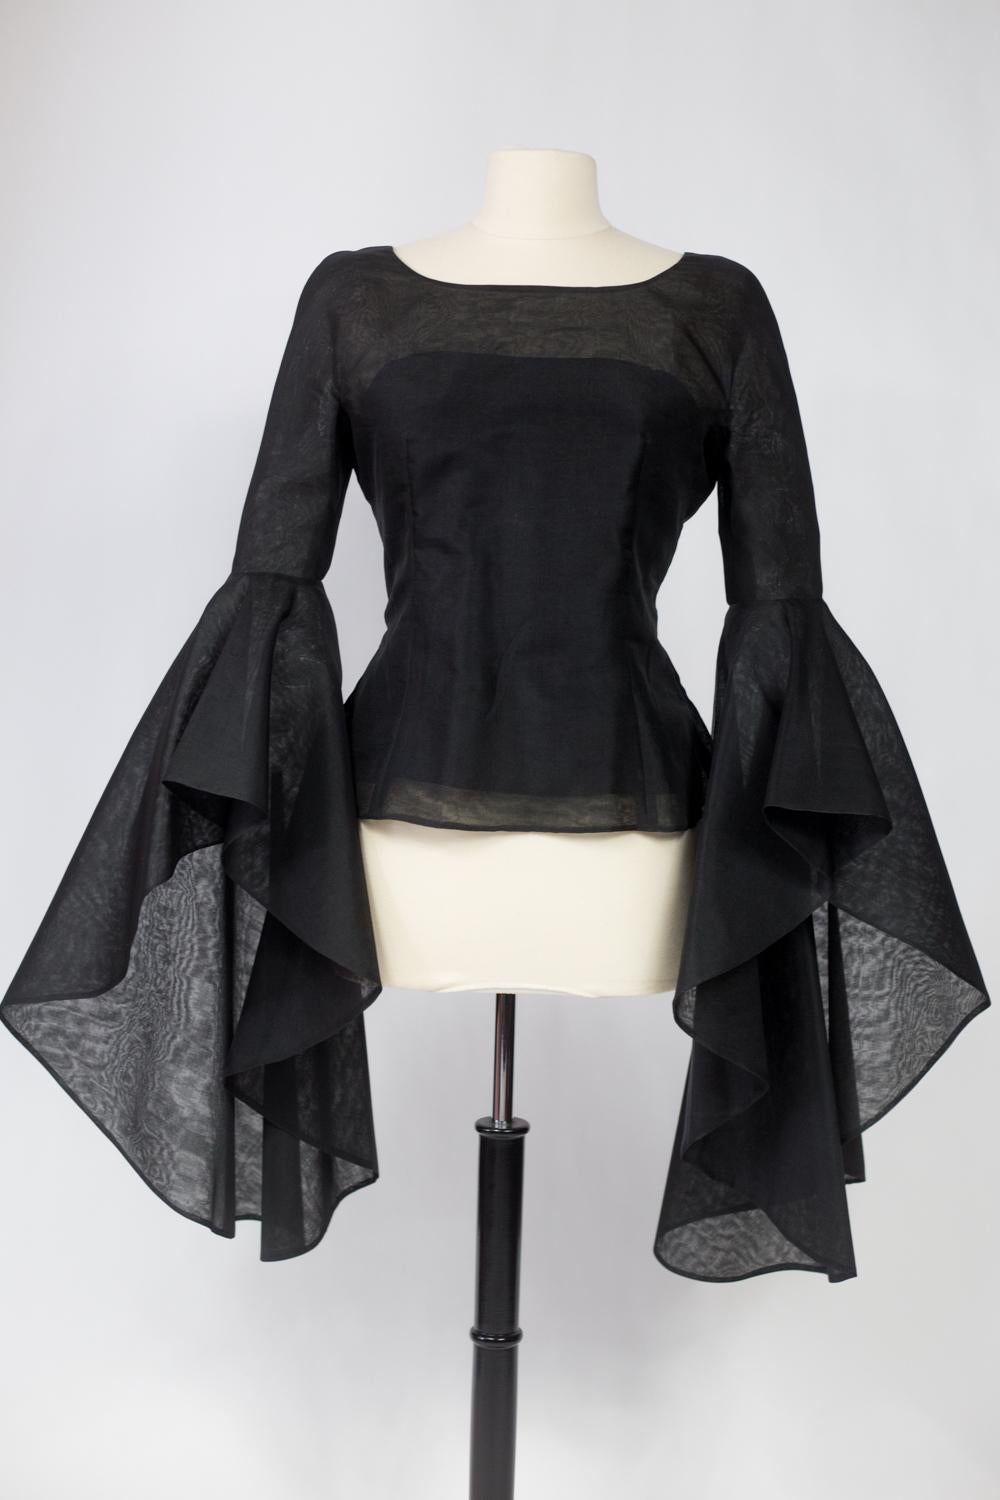 Black A Pierre Cardin Organza Blouse With Dramatic Batwing Sleeves Circa 1970/1980 For Sale